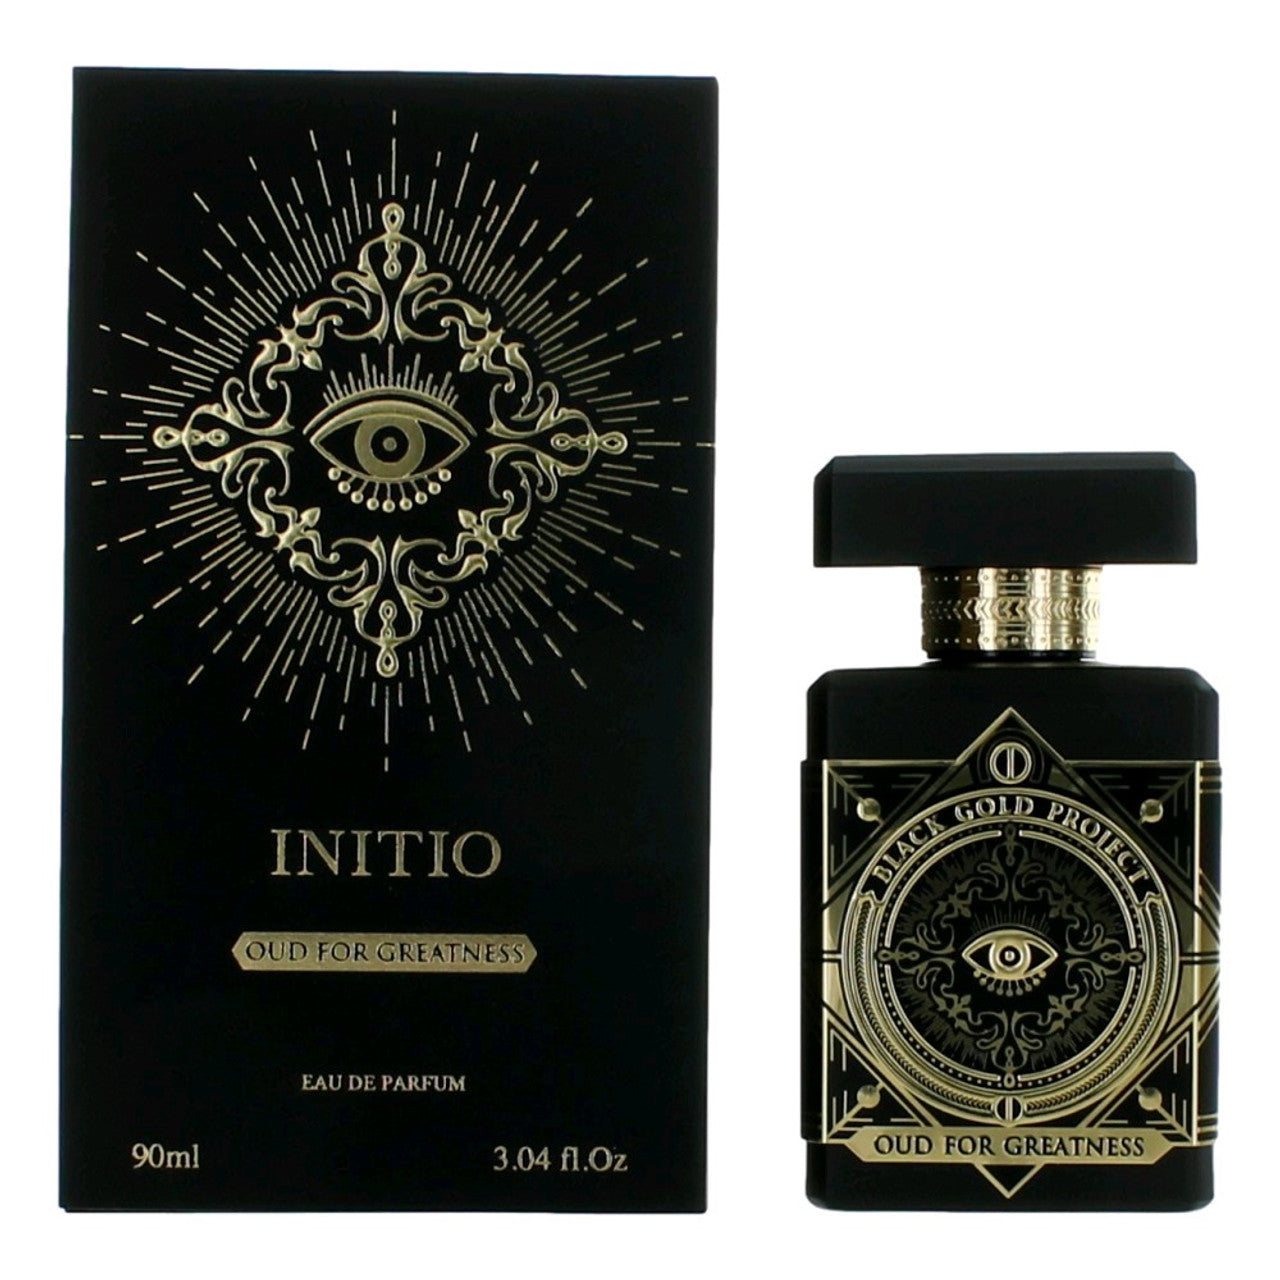 3 oz bottle of Initio's Oud for Greatness Cologne